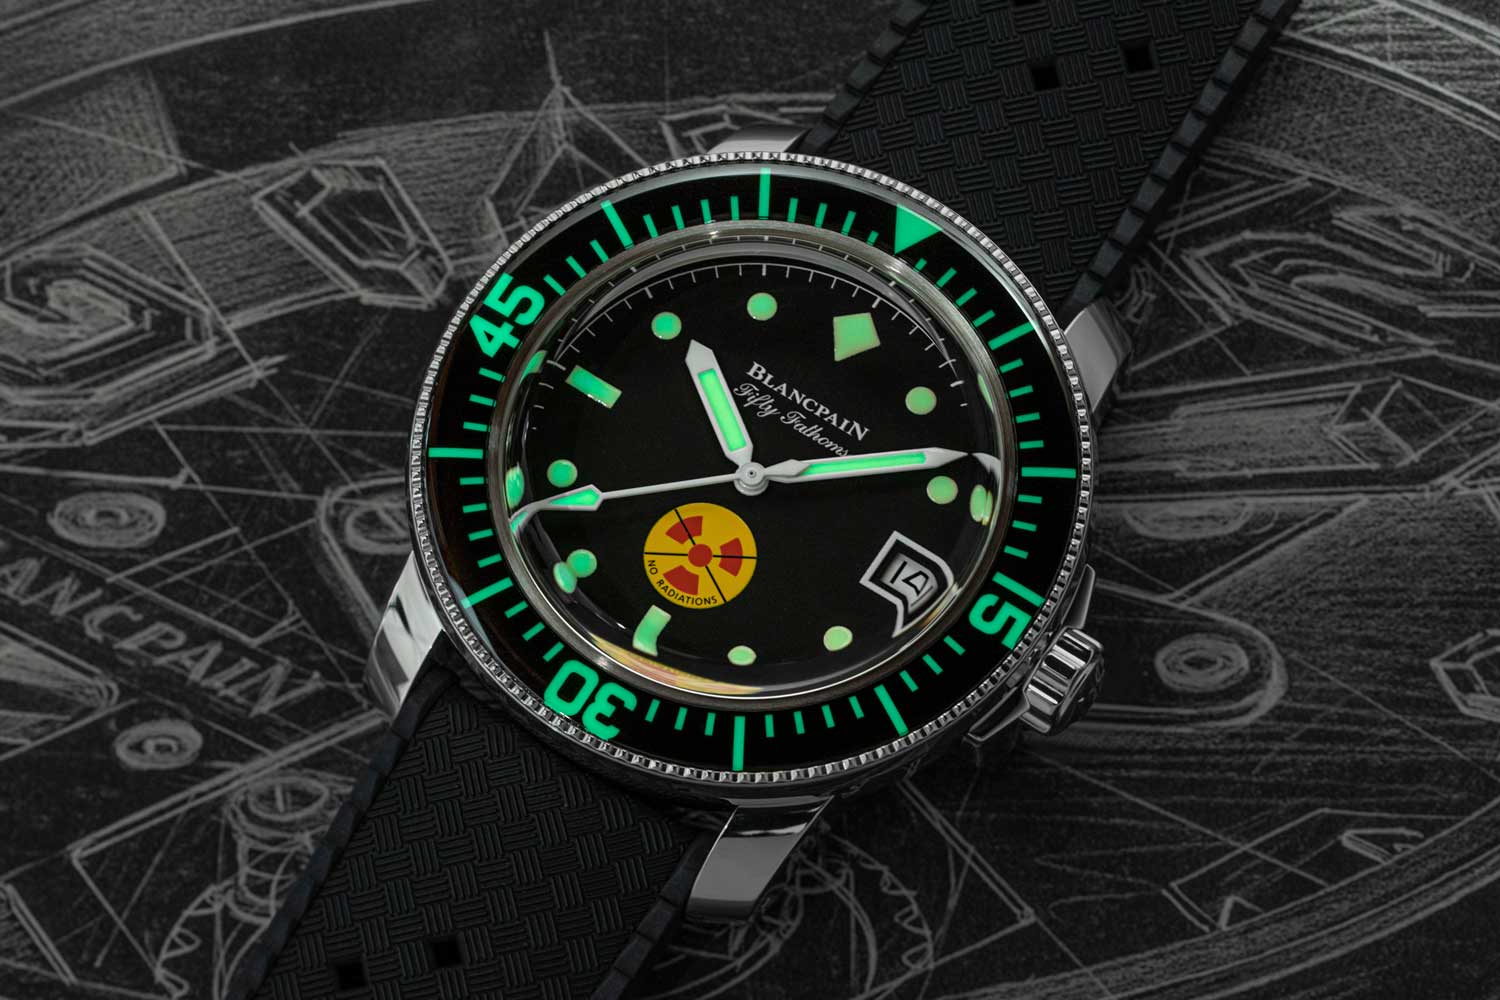 With its clean, straightforward dial, straight hands and ample use of vintage-looking Super-LumiNova, the new Tribute to Fifty Fathoms “No Rad” is visually quite similar to the original model from the 1960s. (©Revolution)